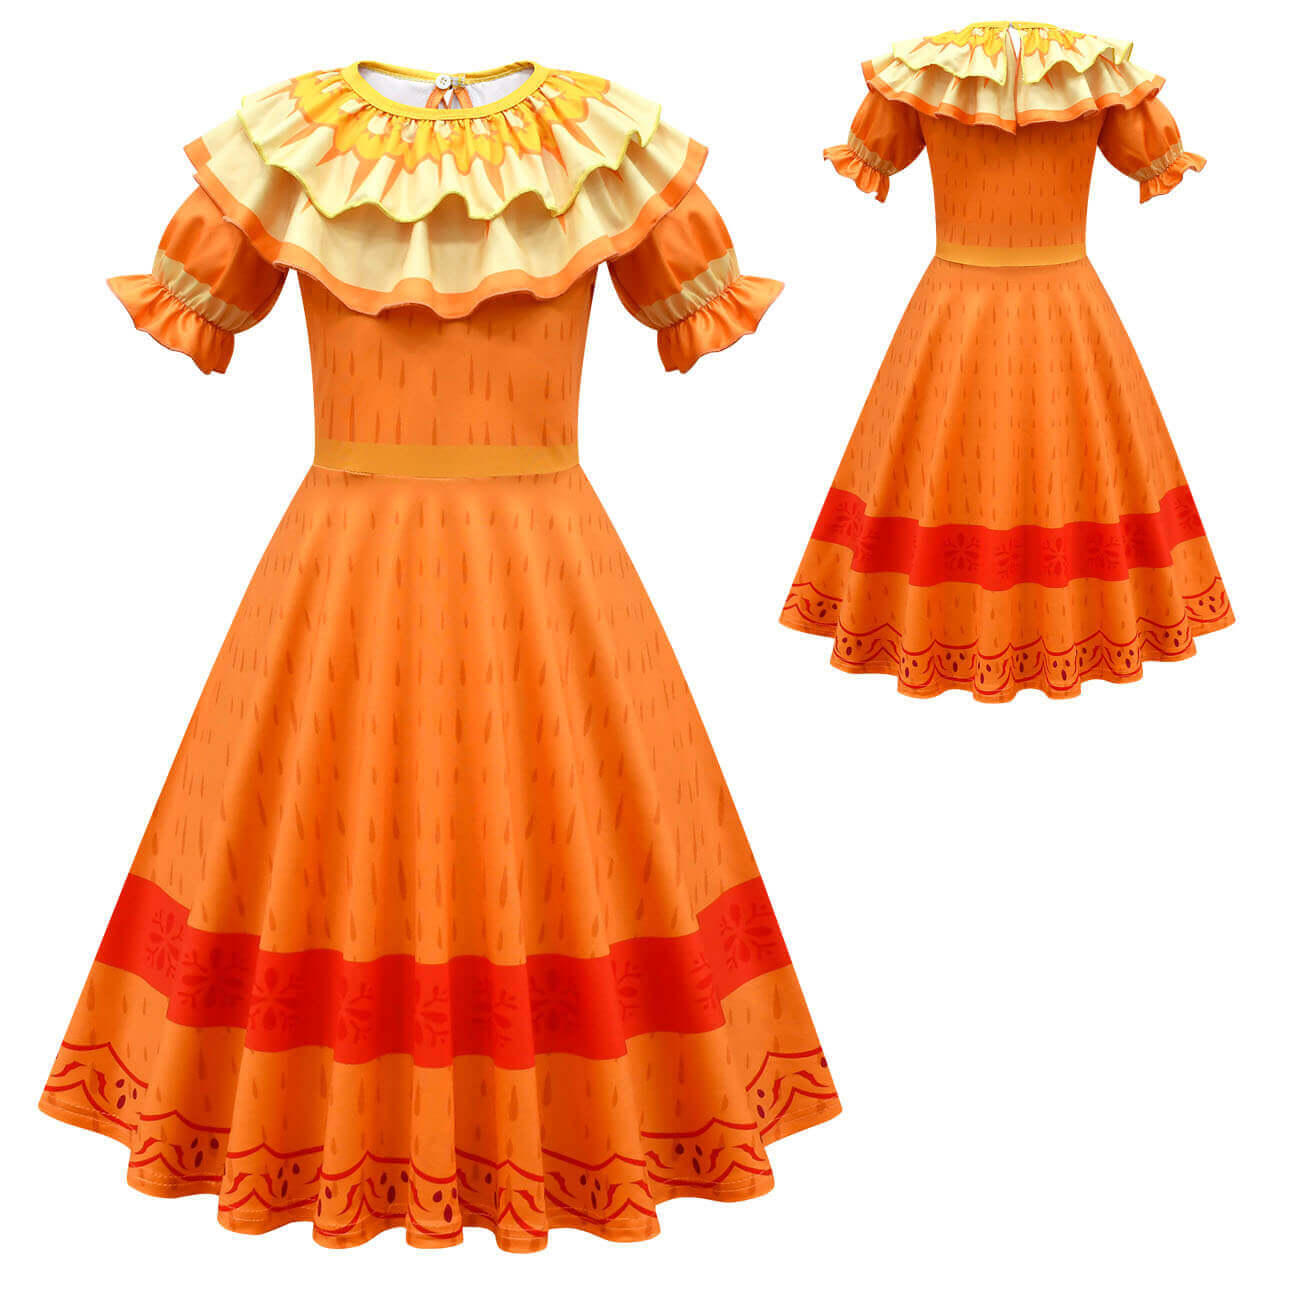 Magical Family Madrigal Dresses Adult Princess Cosplay Outfit Halloween Dress Up Costume